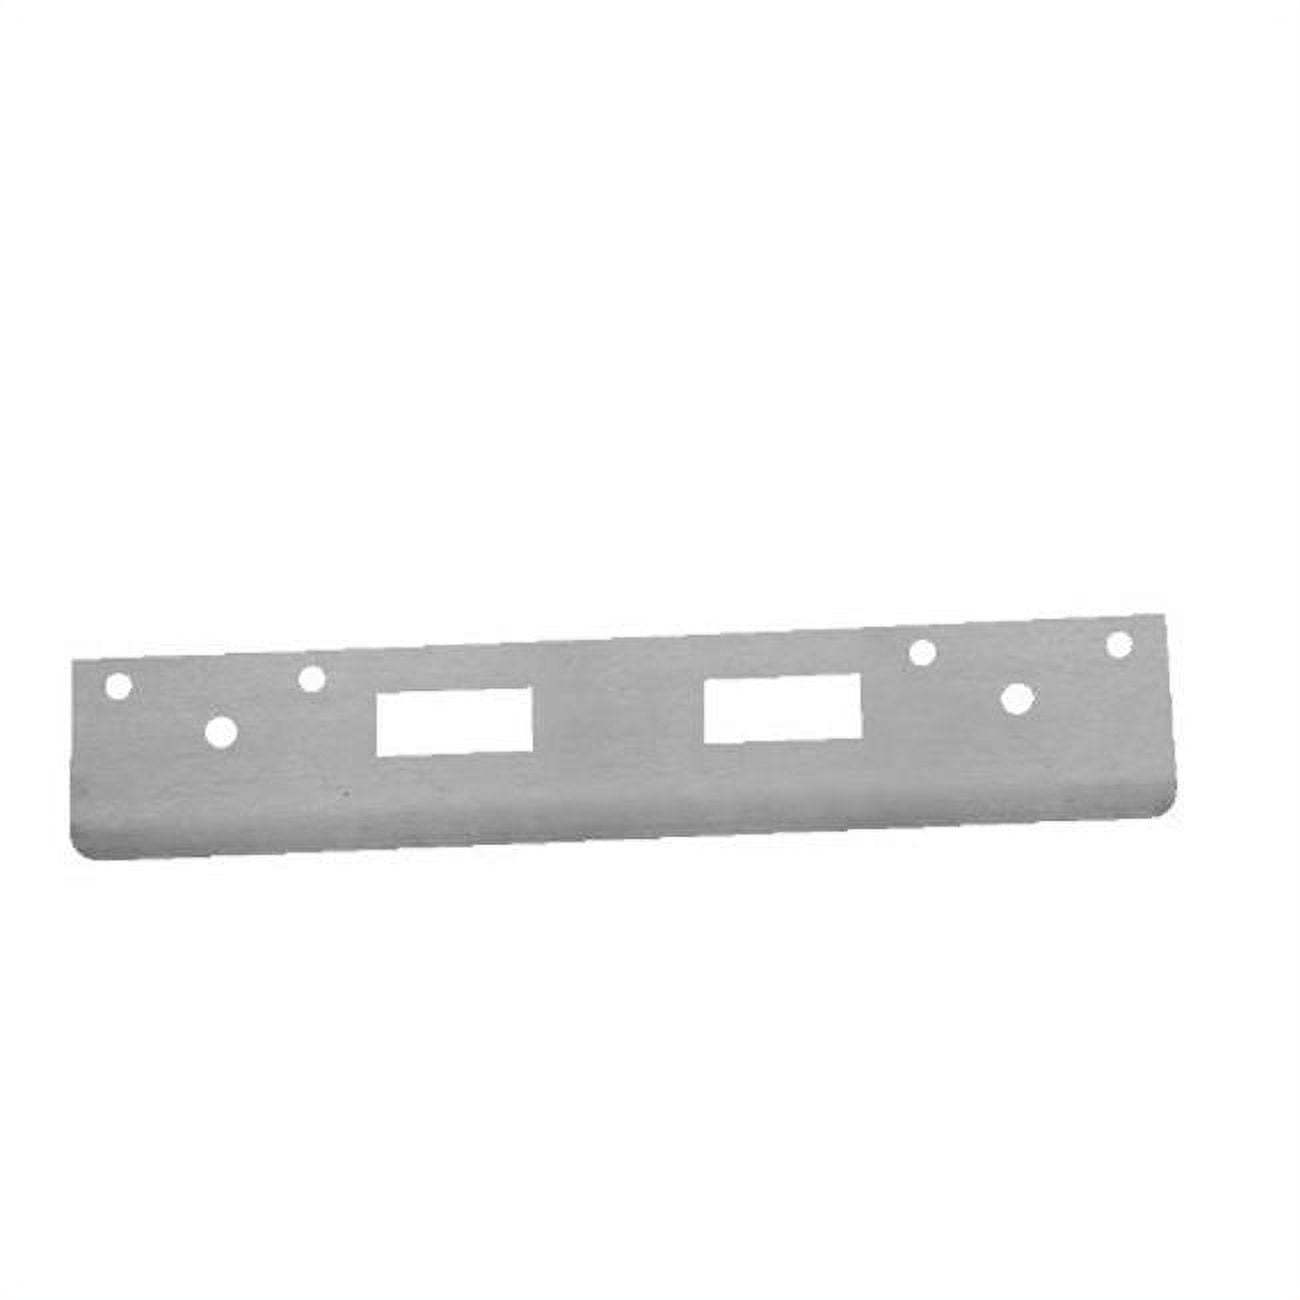 Fl 212n4-bp 12 In. Full Lip High Security Strike With 4 In. Ctc Latch Holes, Brass Plated